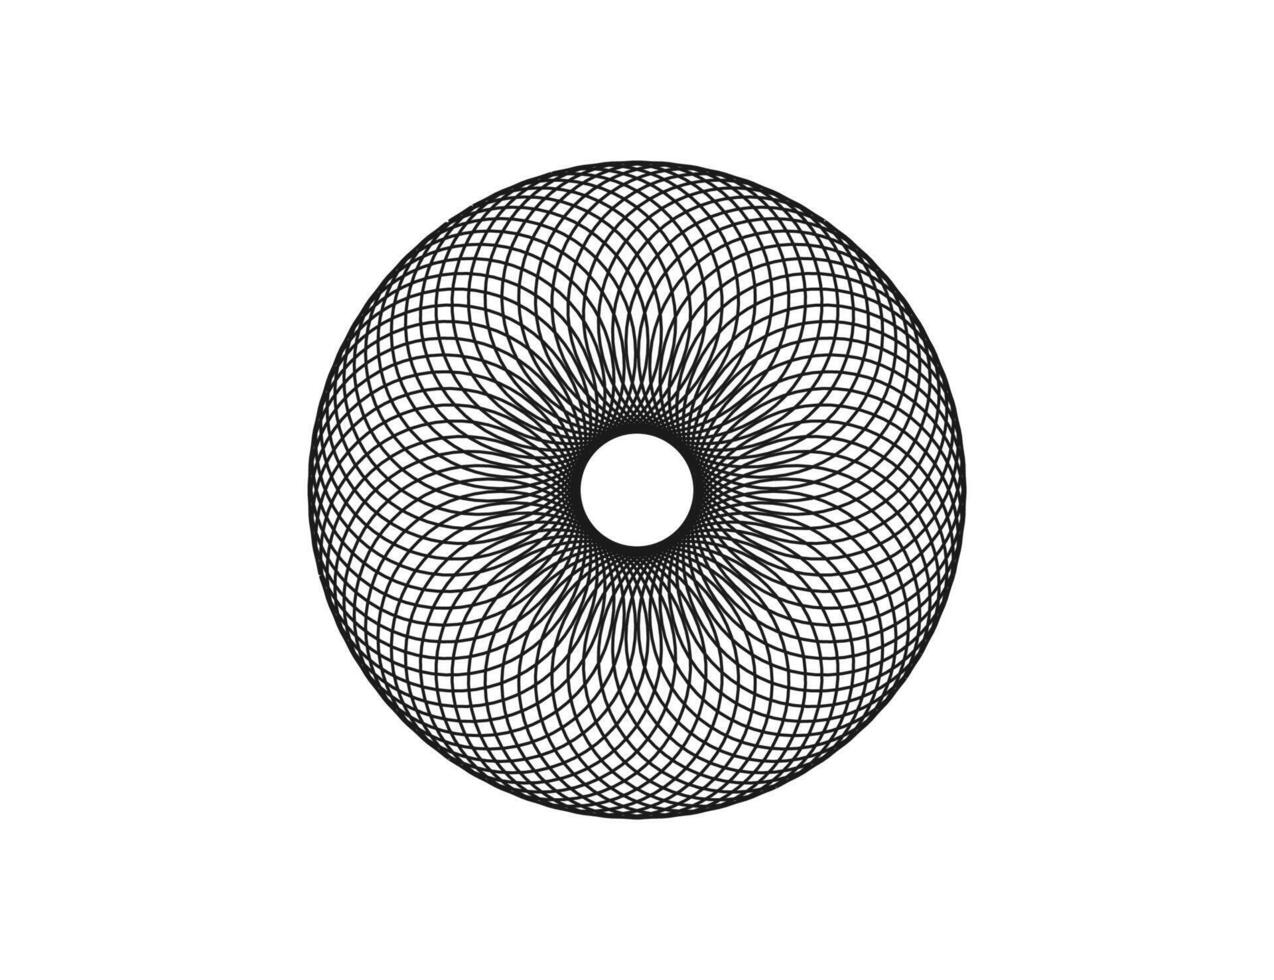 Spirograph abstract element on white background. Vector illustration.